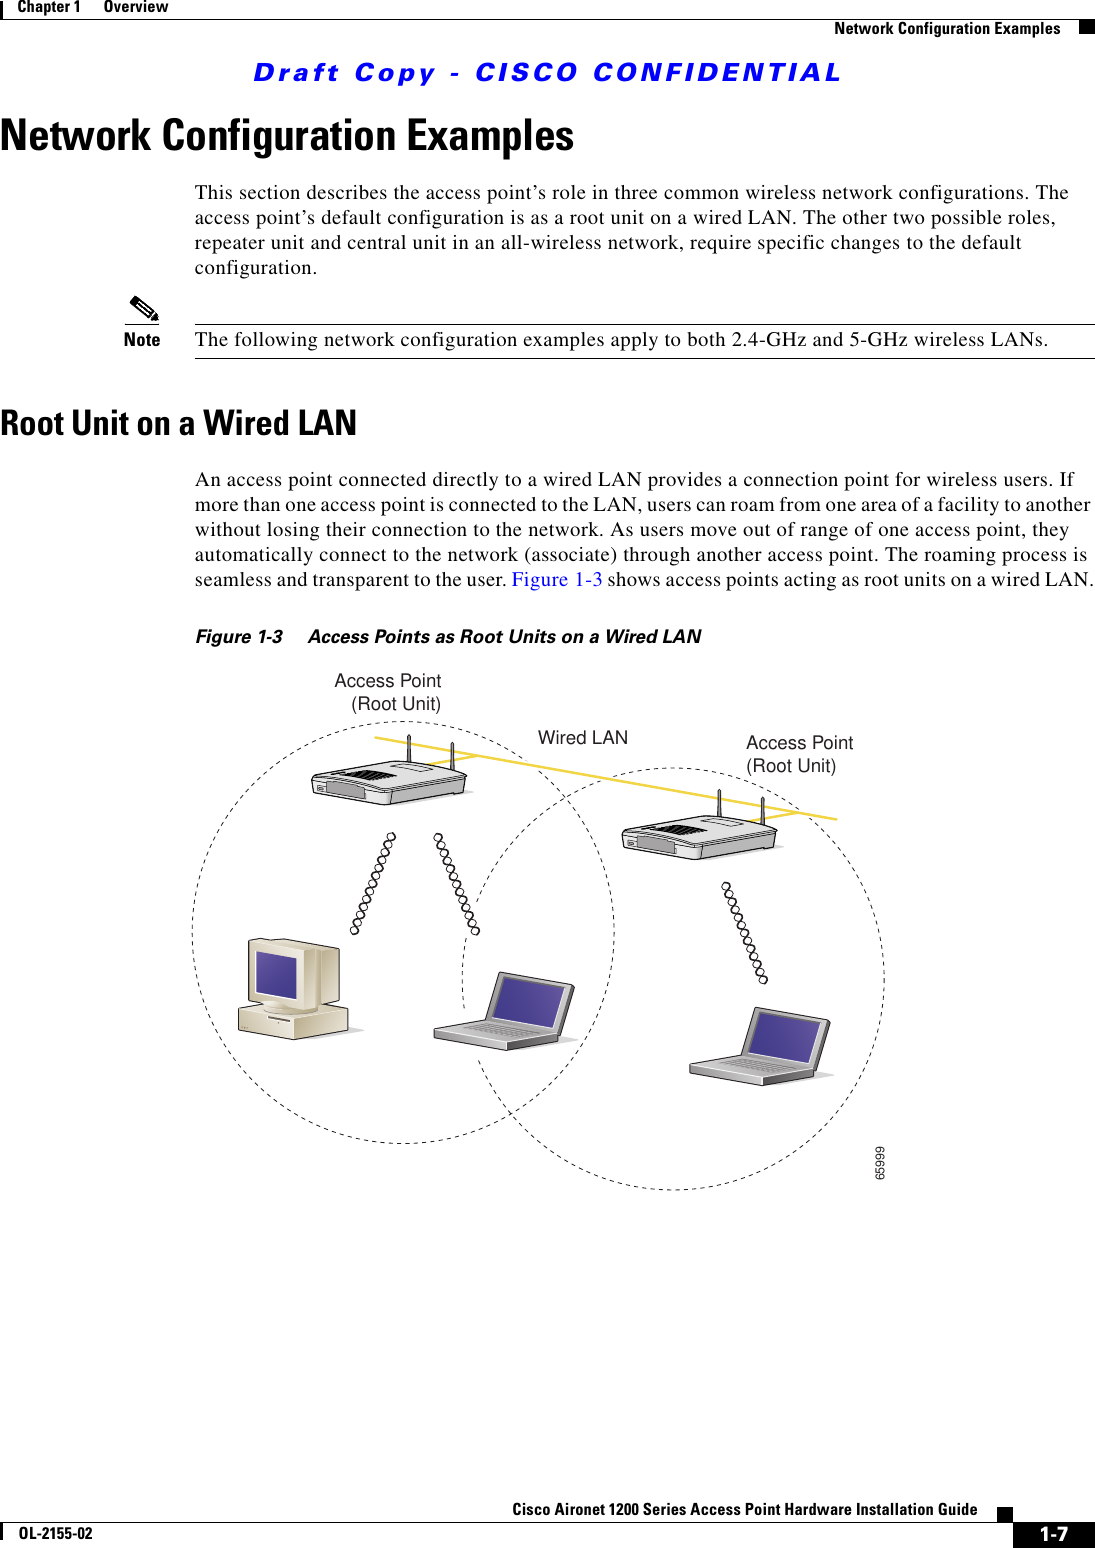 Draft Copy - CISCO CONFIDENTIAL 1-7Cisco Aironet 1200 Series Access Point Hardware Installation GuideOL-2155-02Chapter 1      OverviewNetwork Configuration ExamplesNetwork Configuration ExamplesThis section describes the access point’s role in three common wireless network configurations. The access point’s default configuration is as a root unit on a wired LAN. The other two possible roles, repeater unit and central unit in an all-wireless network, require specific changes to the default configuration.Note The following network configuration examples apply to both 2.4-GHz and 5-GHz wireless LANs.Root Unit on a Wired LANAn access point connected directly to a wired LAN provides a connection point for wireless users. If more than one access point is connected to the LAN, users can roam from one area of a facility to another without losing their connection to the network. As users move out of range of one access point, they automatically connect to the network (associate) through another access point. The roaming process is seamless and transparent to the user. Figure 1-3 shows access points acting as root units on a wired LAN.Figure 1-3 Access Points as Root Units on a Wired LANAccess Point(Root Unit)Access Point(Root Unit)65999Wired LAN